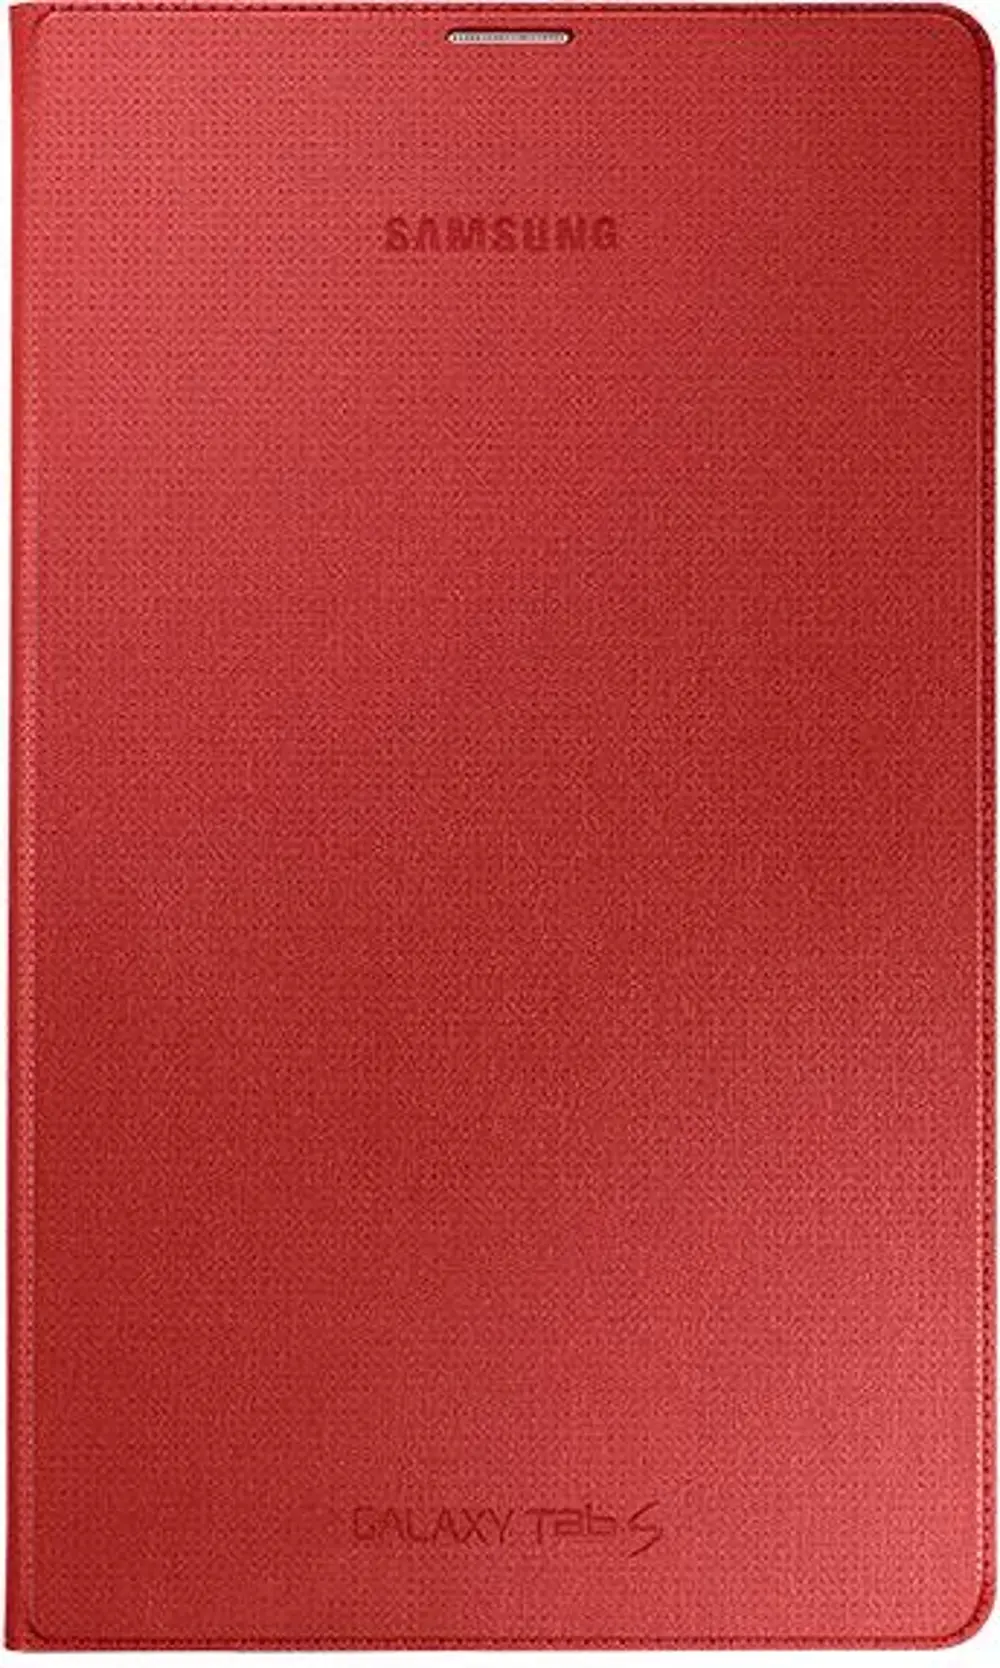 ET-DT700WREGUJ Samsung Galaxy Tab S 8.4 Inch Simple Cover - Glam Red-1